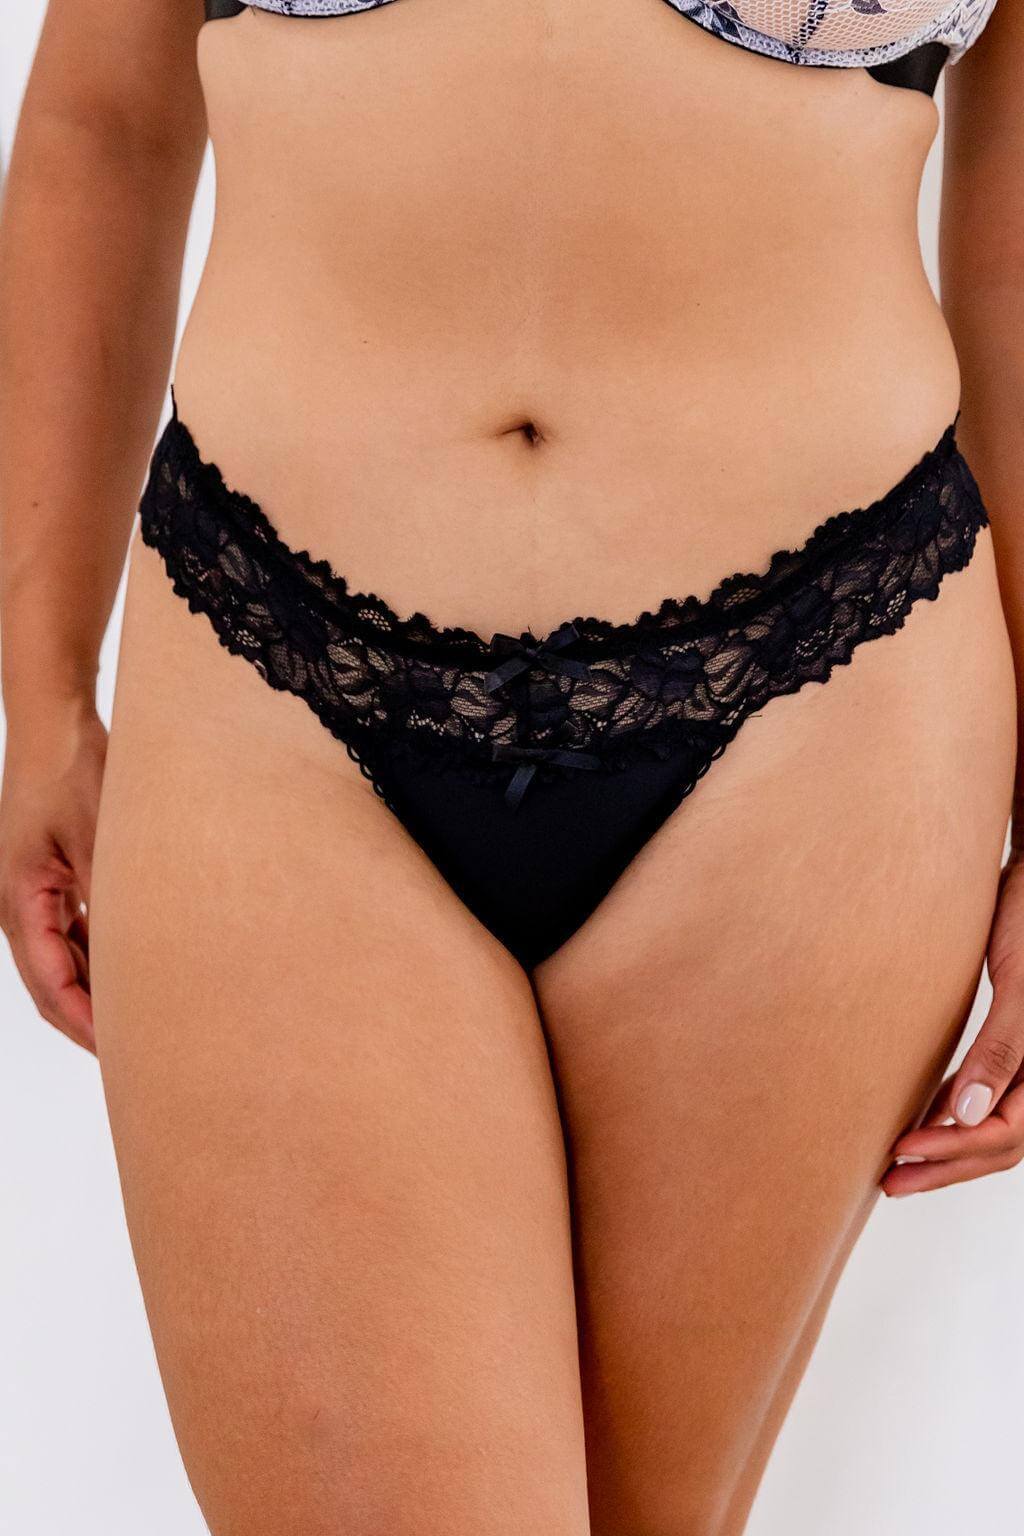 Cory Coal G String - $15.00 - Underwear - Naked Curve